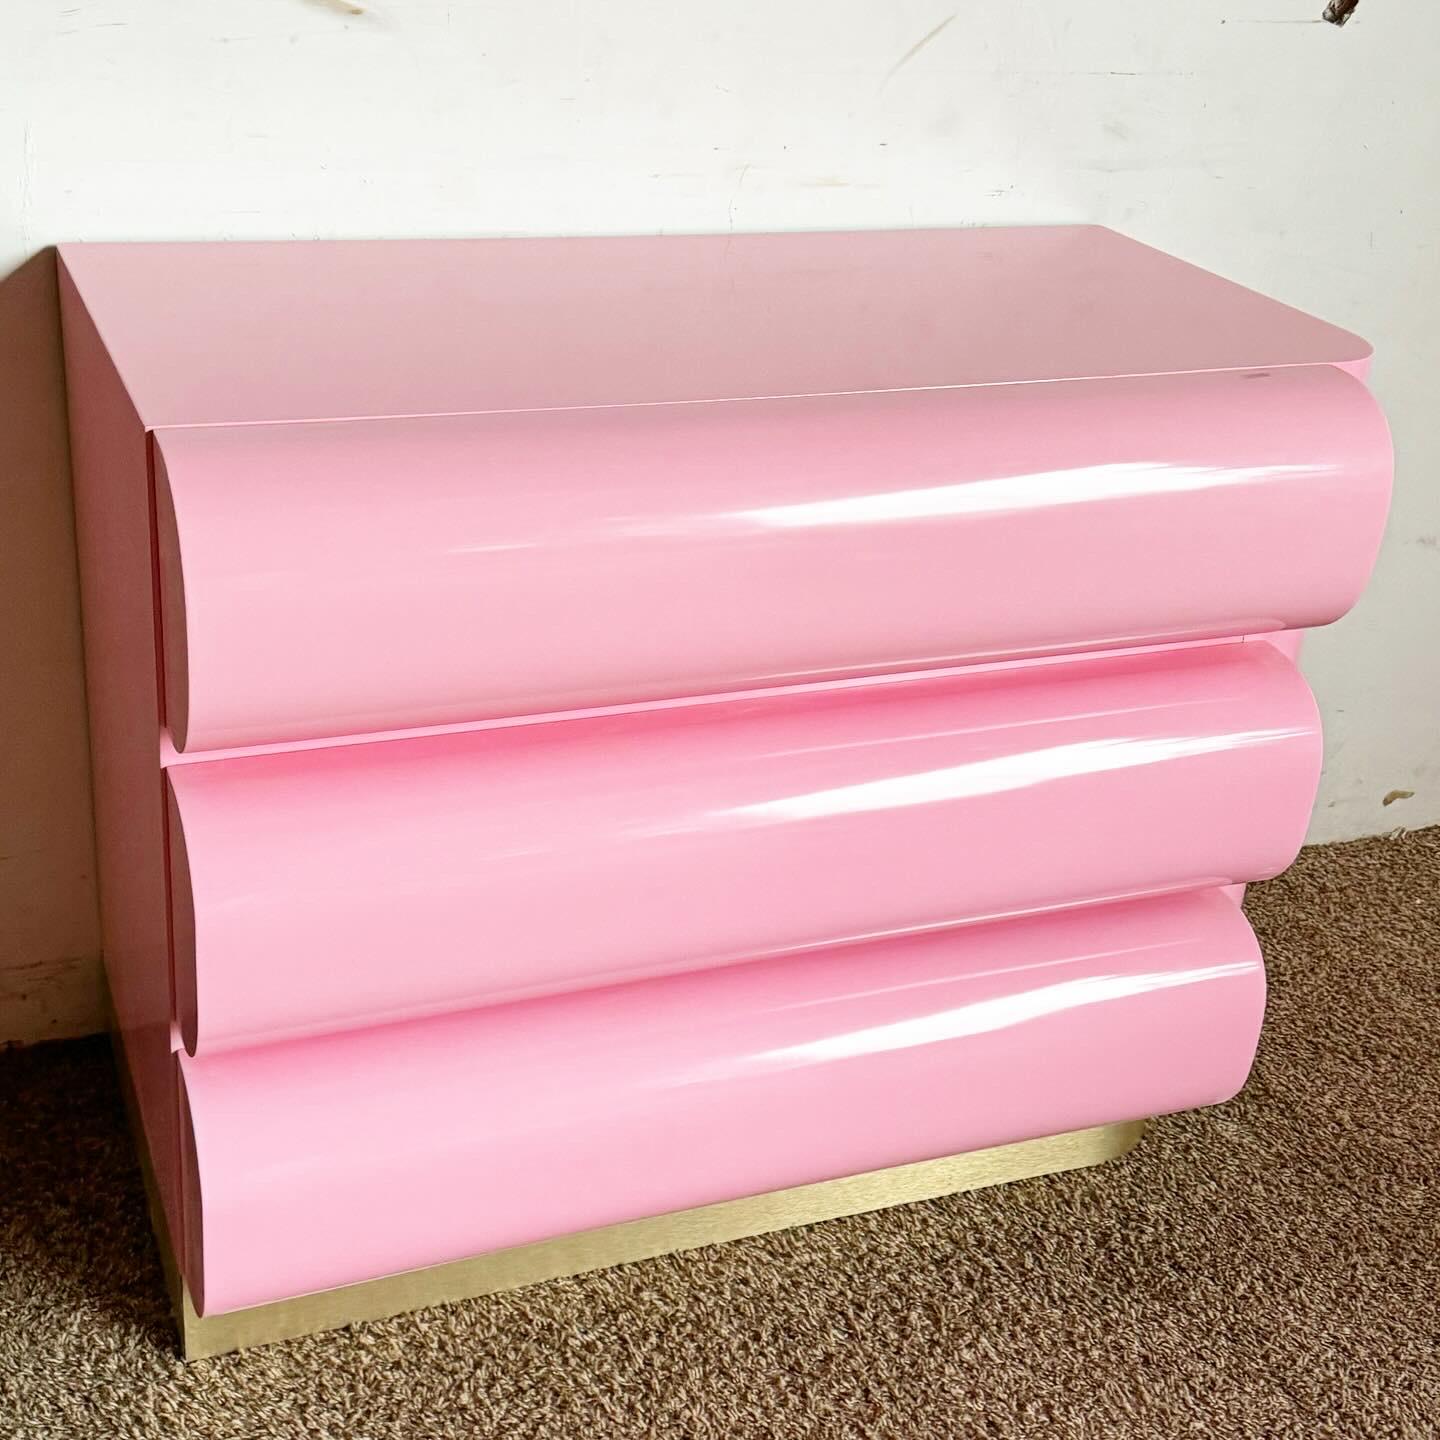 Embrace a bold and sophisticated aesthetic with this Postmodern Pink Lacquered Curved Bullnose Commode/Chest of Drawers, featuring elegant gold accents. This striking piece showcases a unique curved bullnose design, coated in a vivid pink lacquer